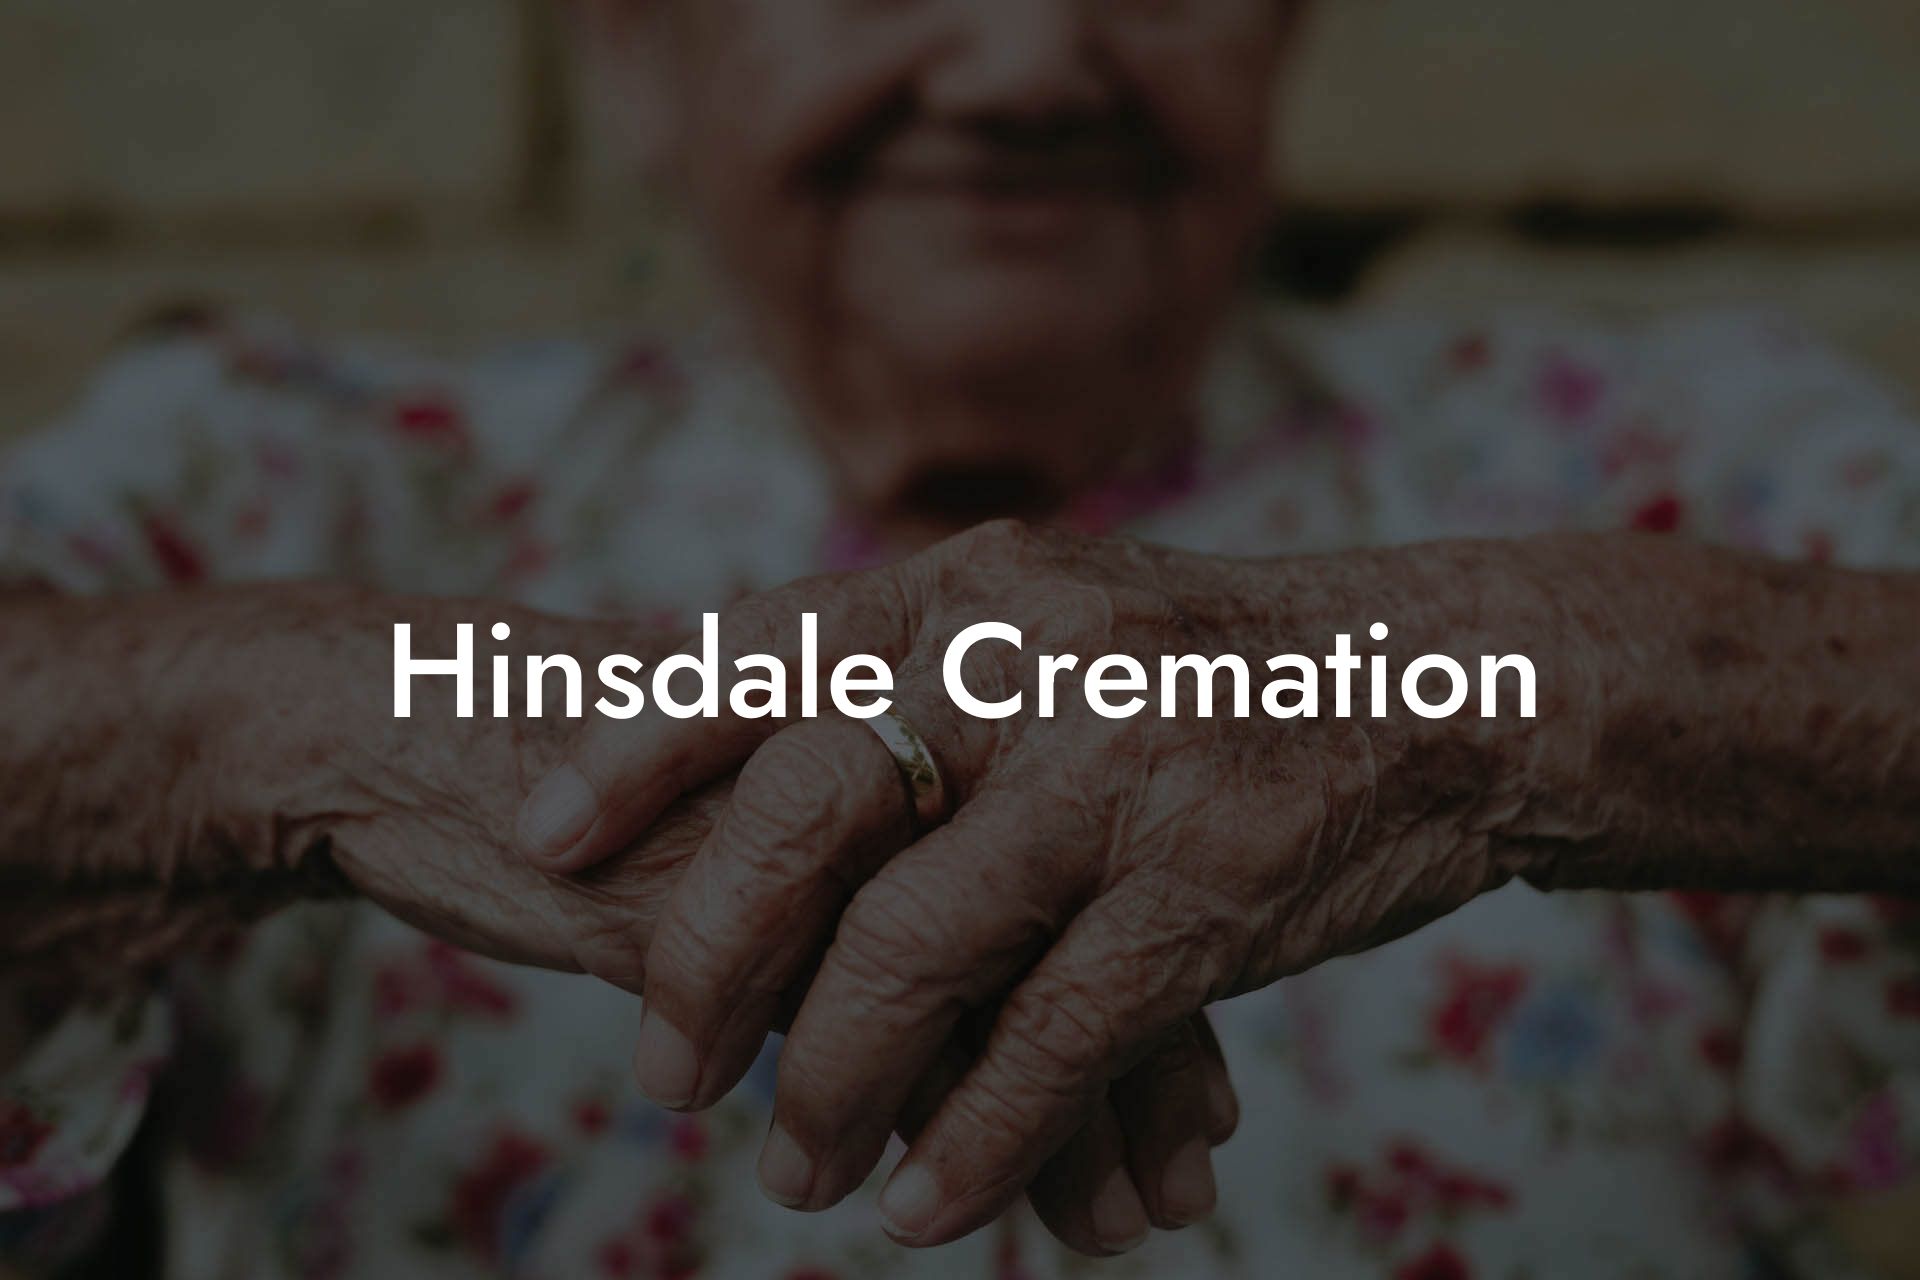 Hinsdale Cremation